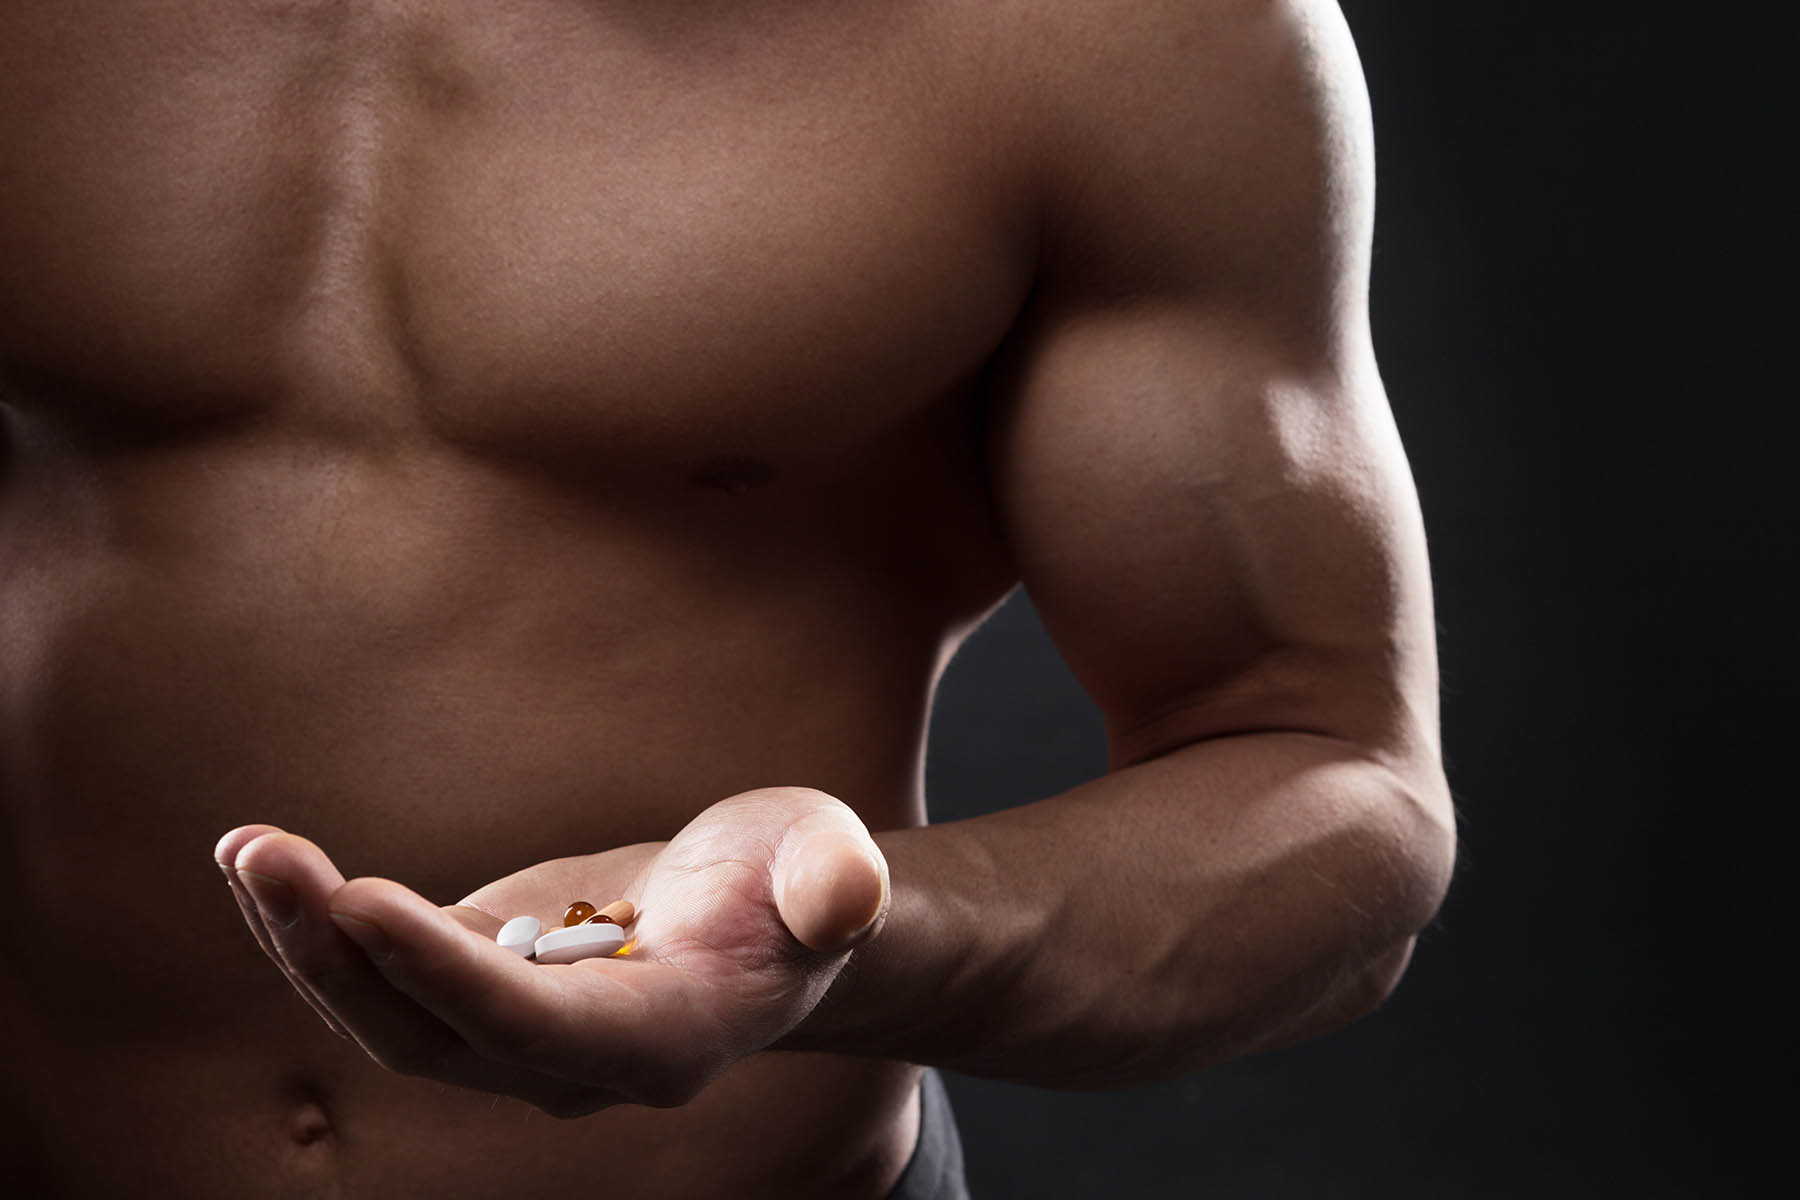 Guide to Post-Workout Supplements and Nutrition